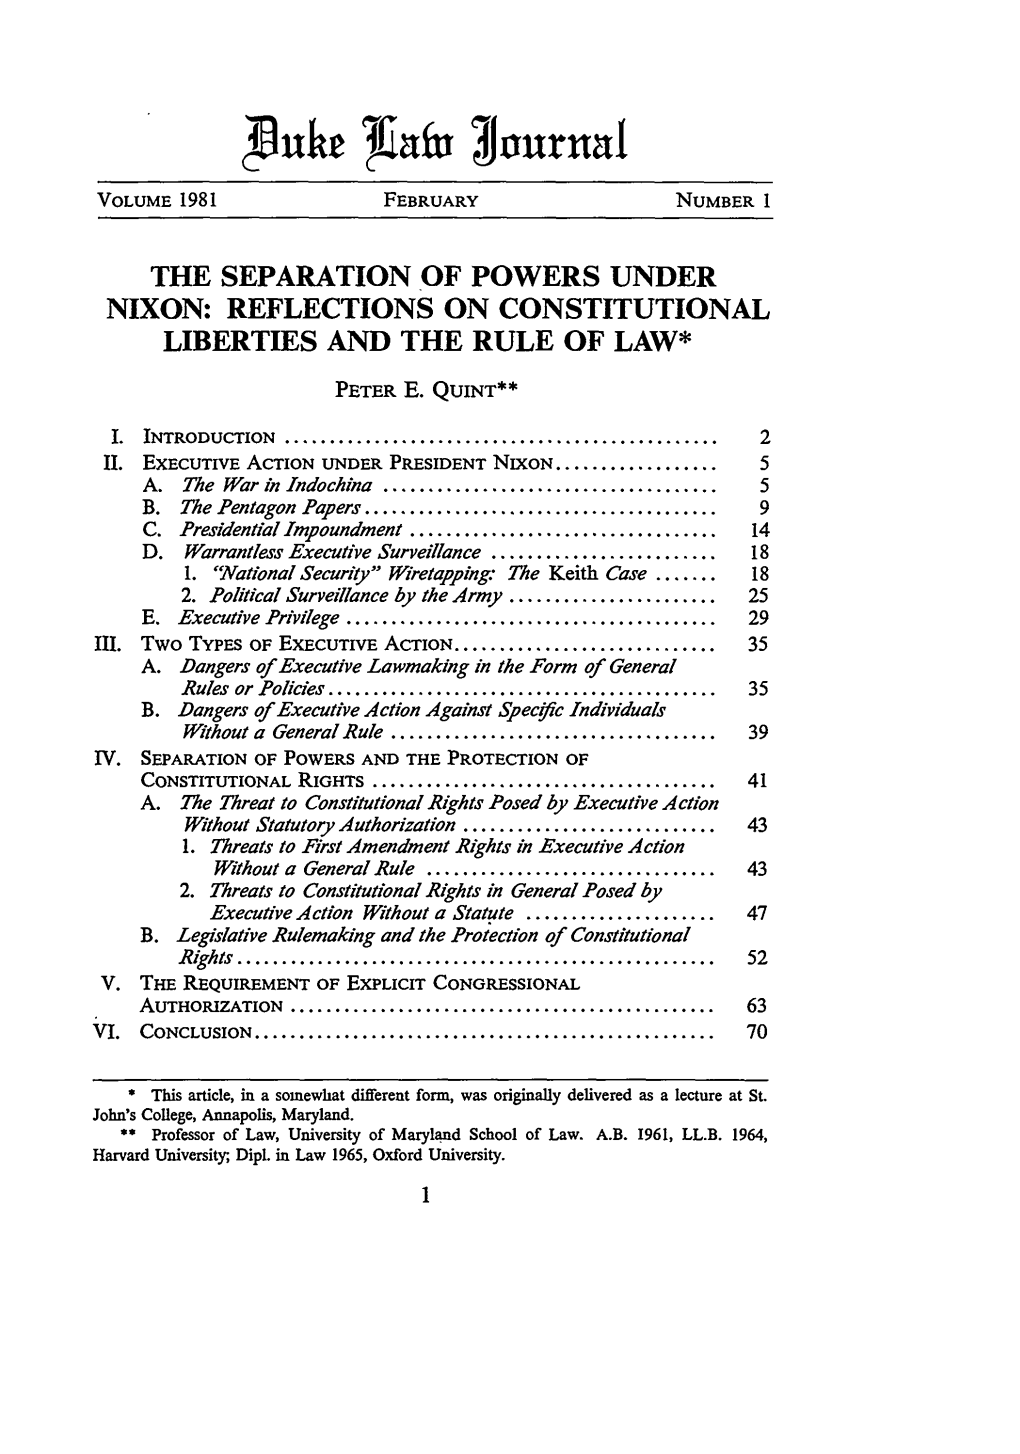 The Separation of Powers Under Nixon: Reflections on Constitutional Liberties and the Rule of Law*